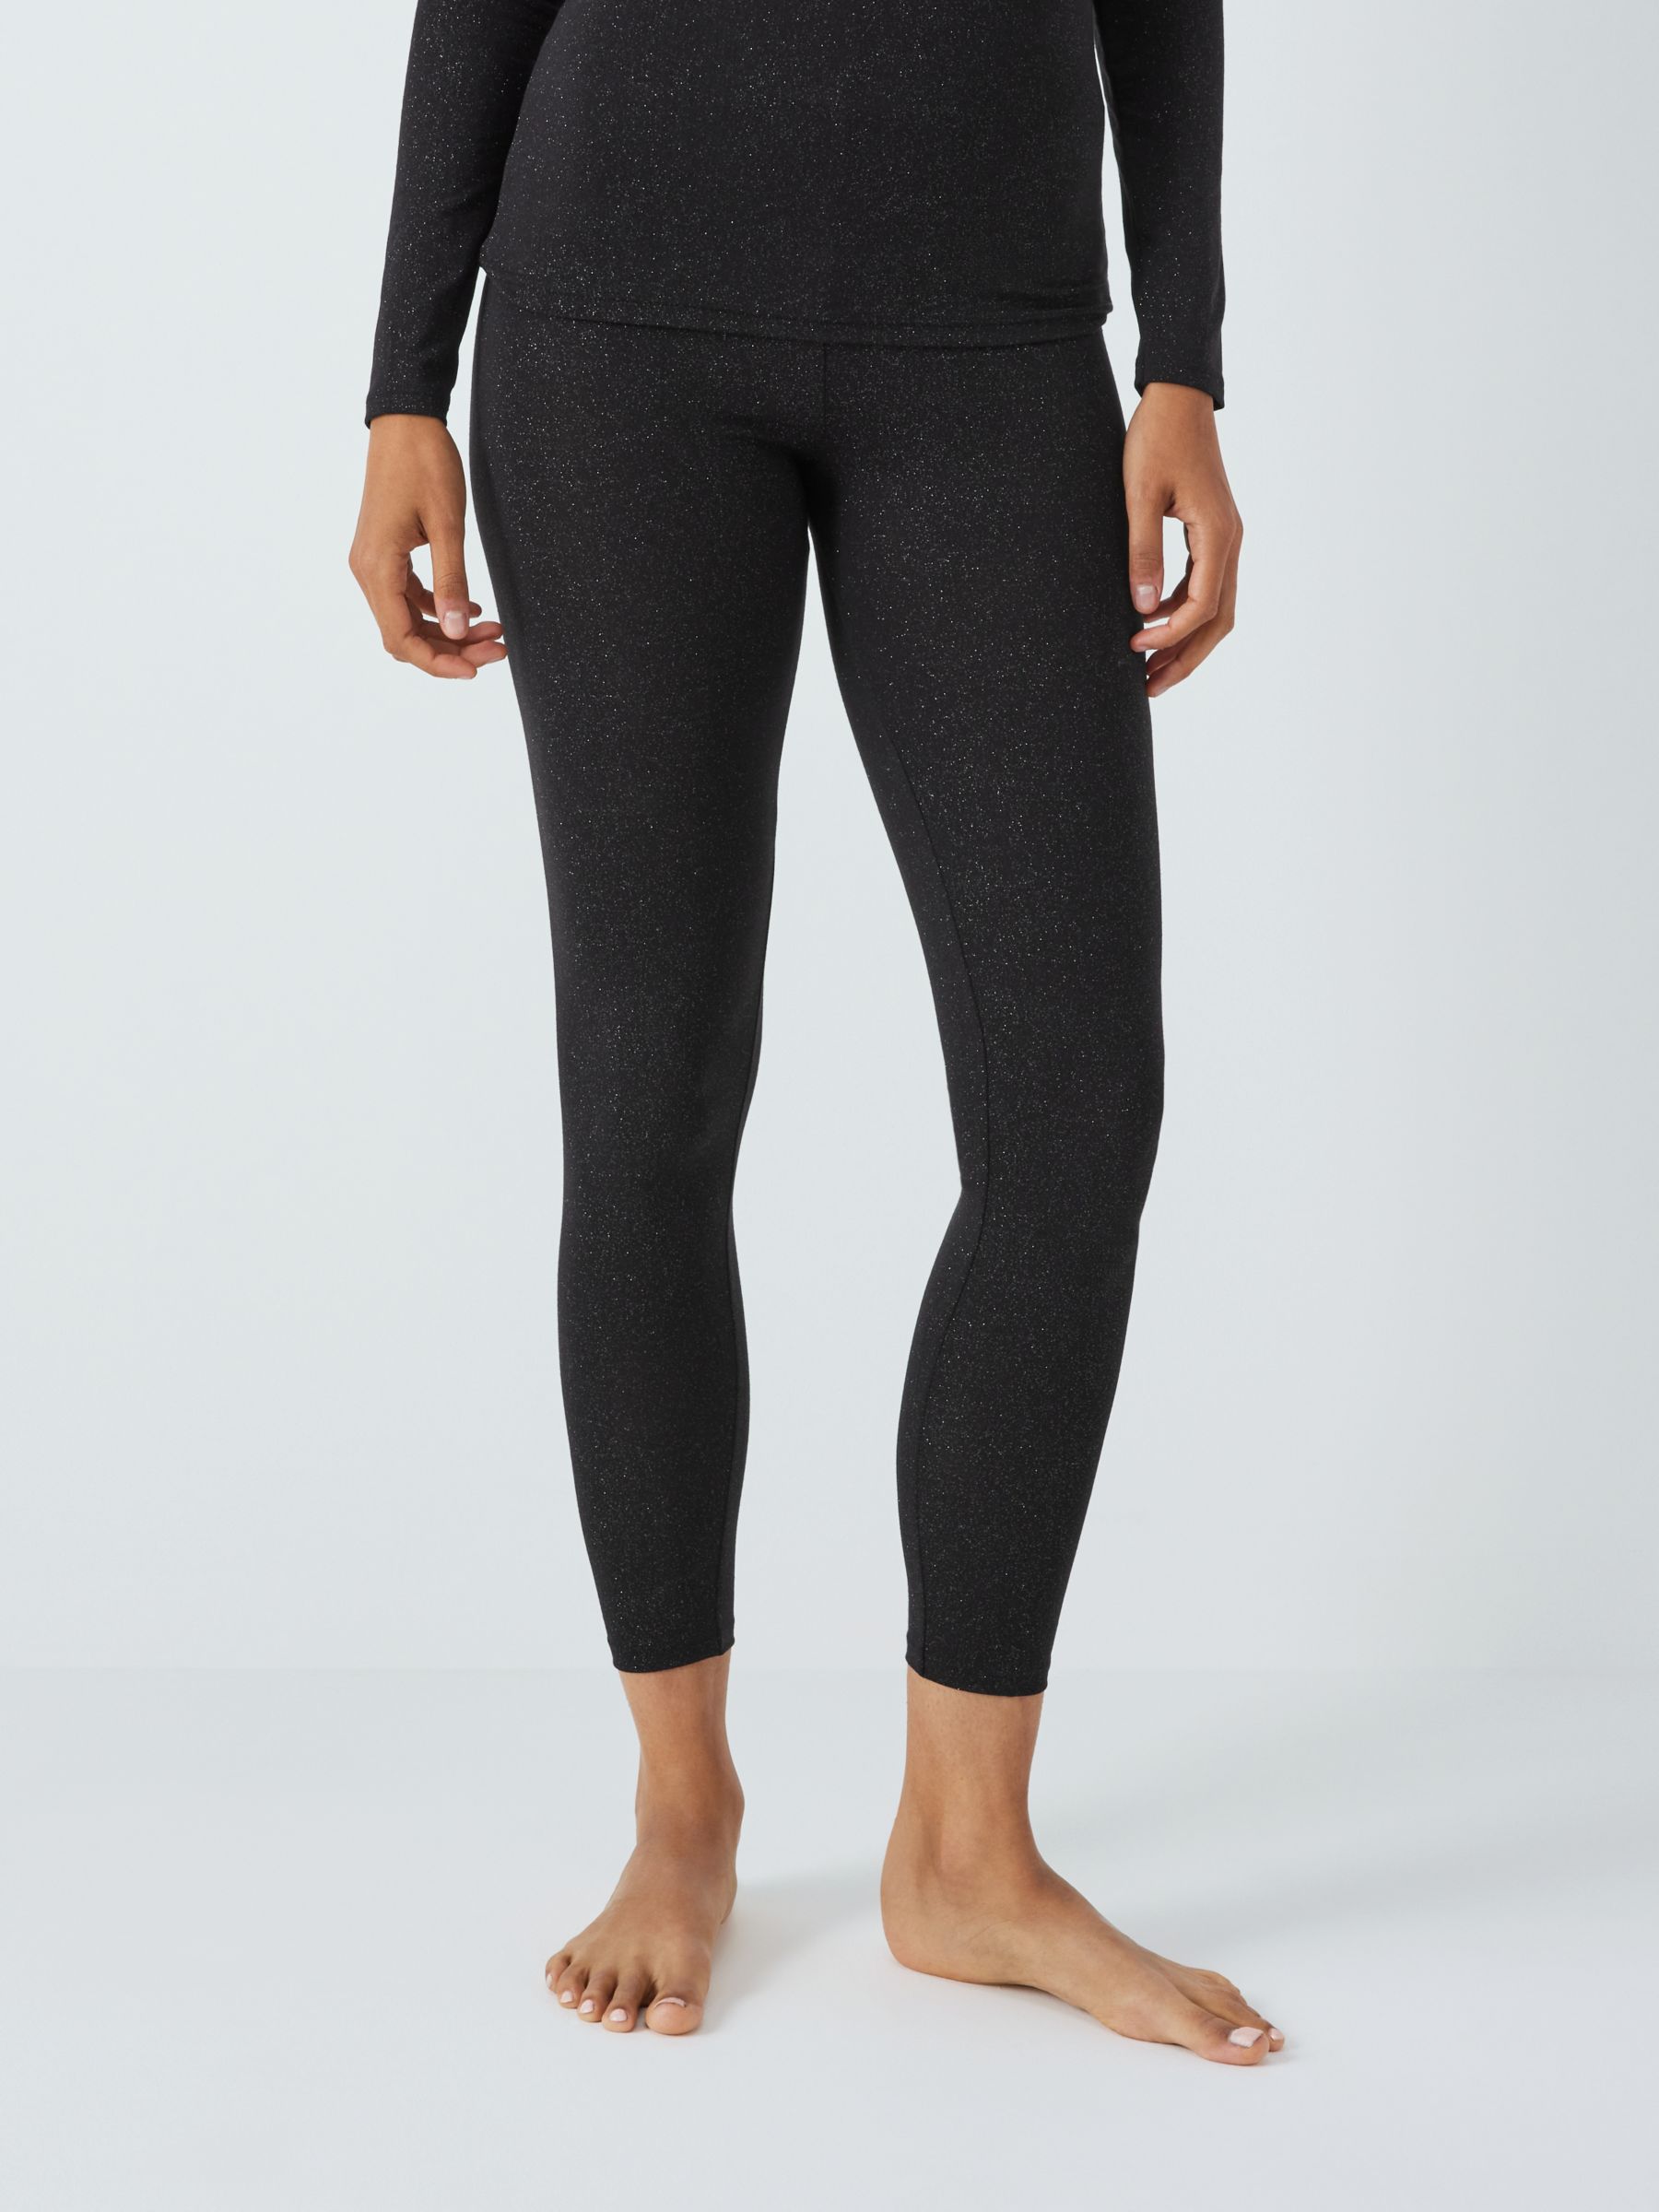 Women's Thermal Leggings & Tights Running Bare Thermal Activewear